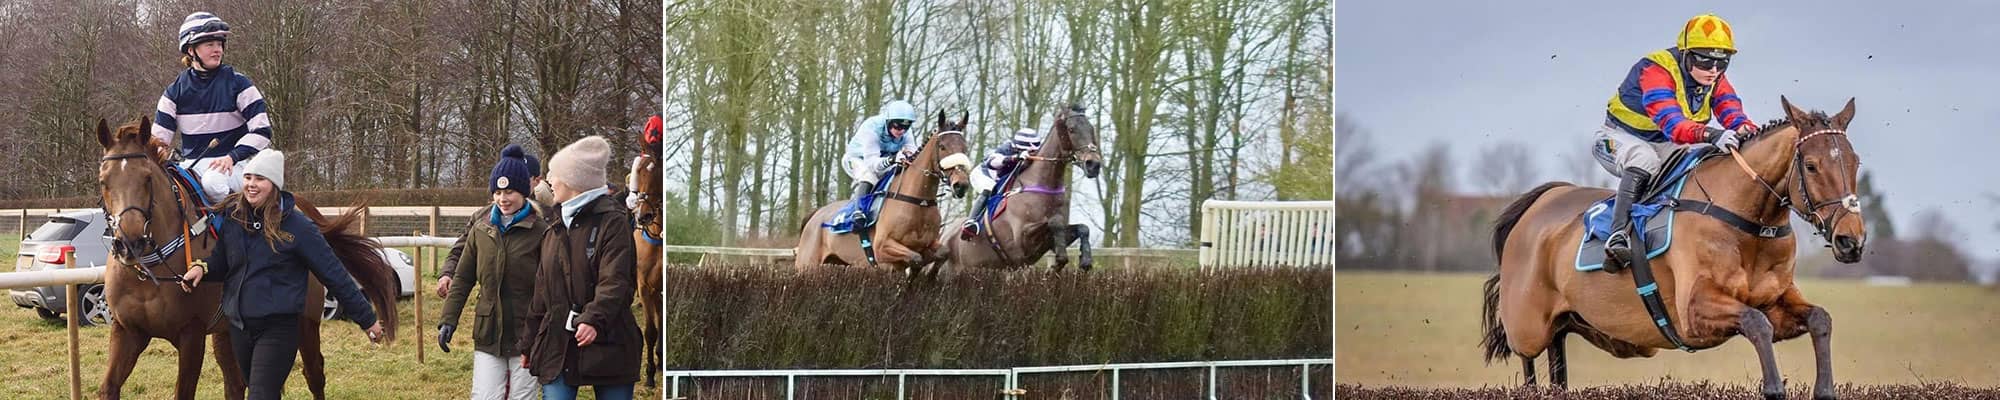 Point to Point Horse Racing in Manchester